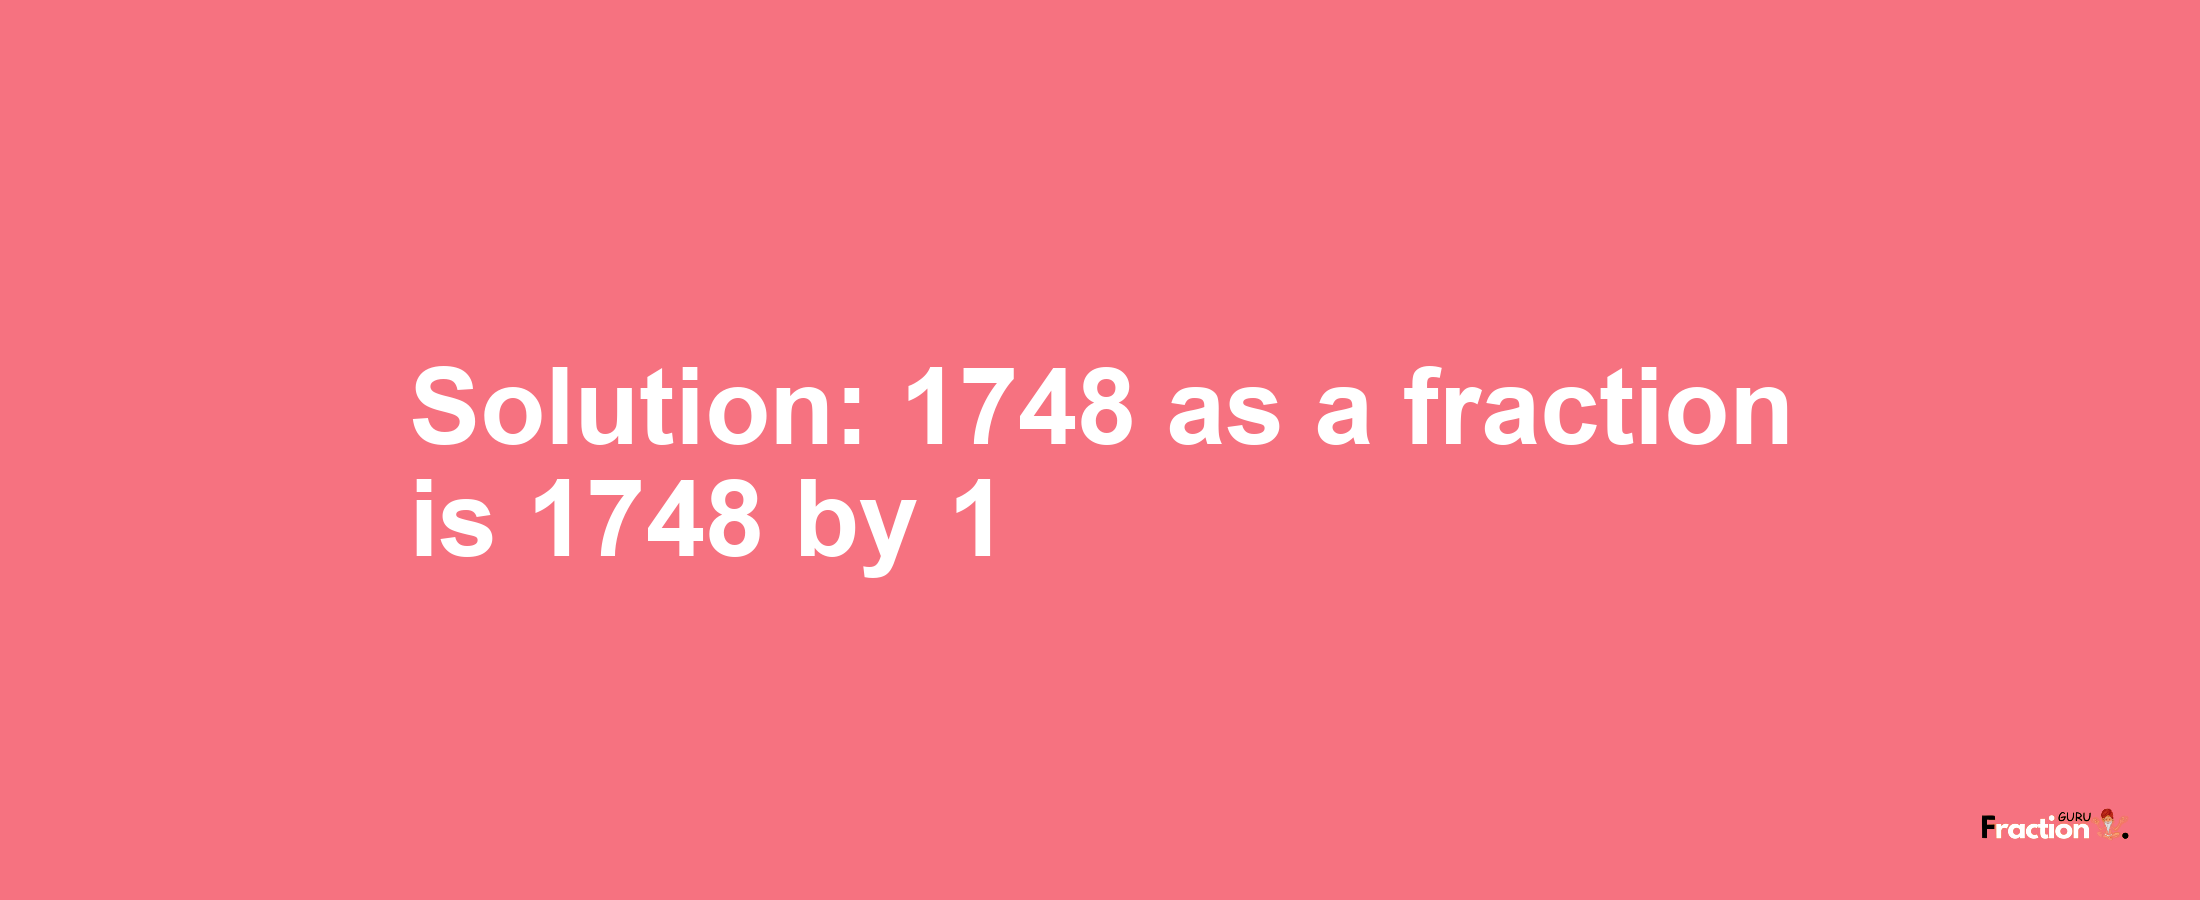 Solution:1748 as a fraction is 1748/1